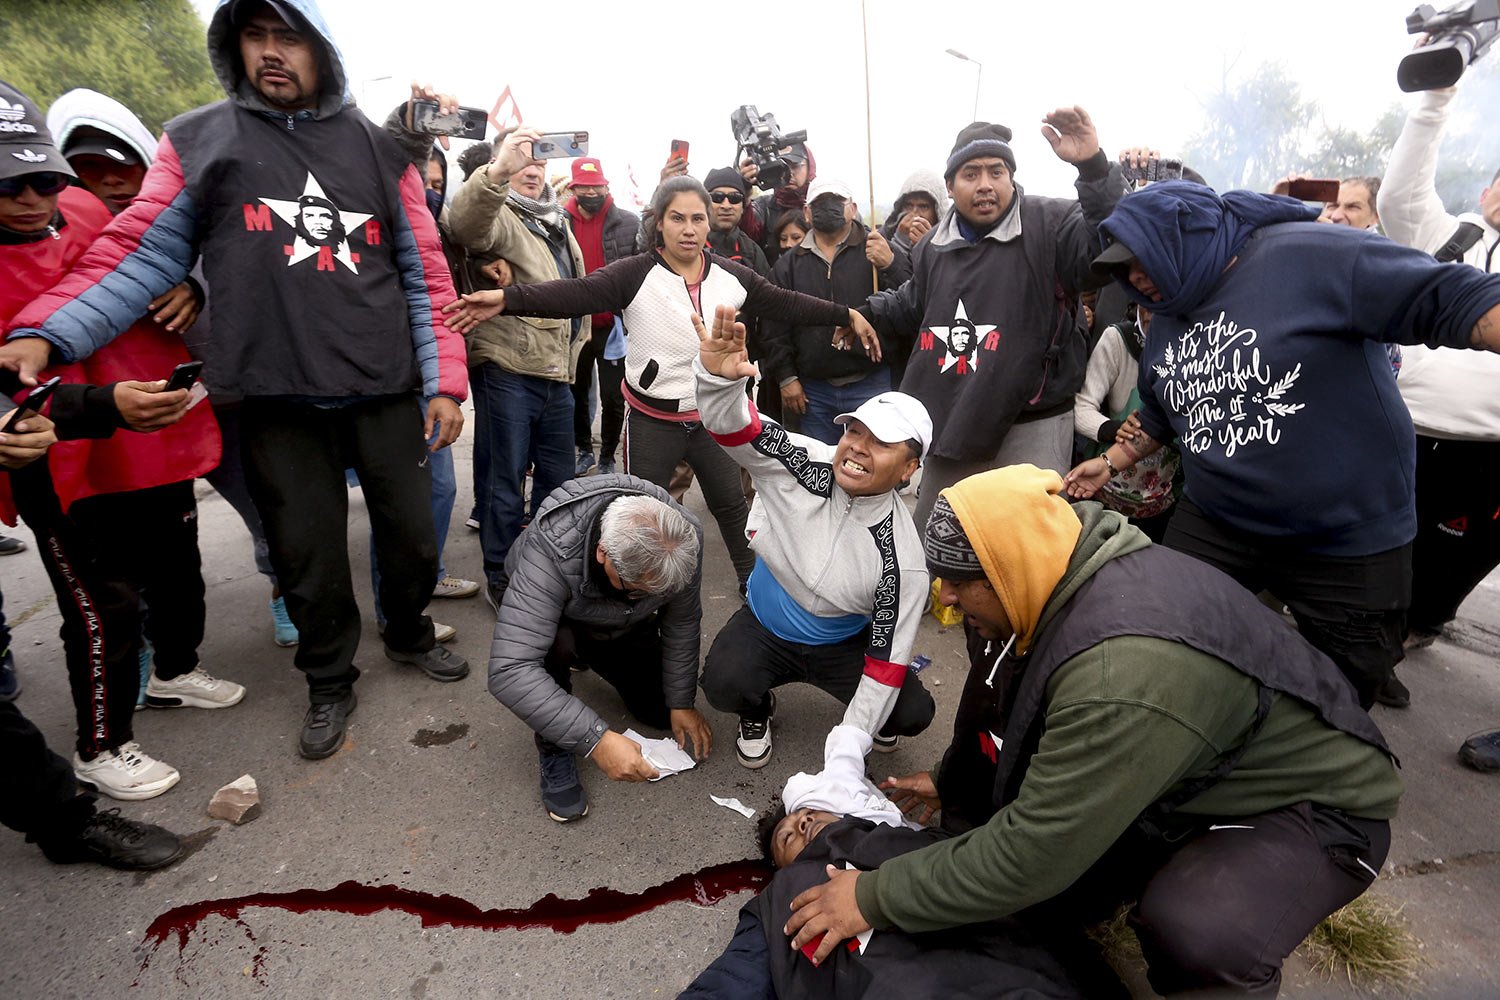  Protesters assist a demonstrator injured during clashes between police and protesters, in San Salvador de Jujuy, Argentina, June 20, 2023. Protests have erupted throughout the province in response to a recently approved provincial constitutional ref